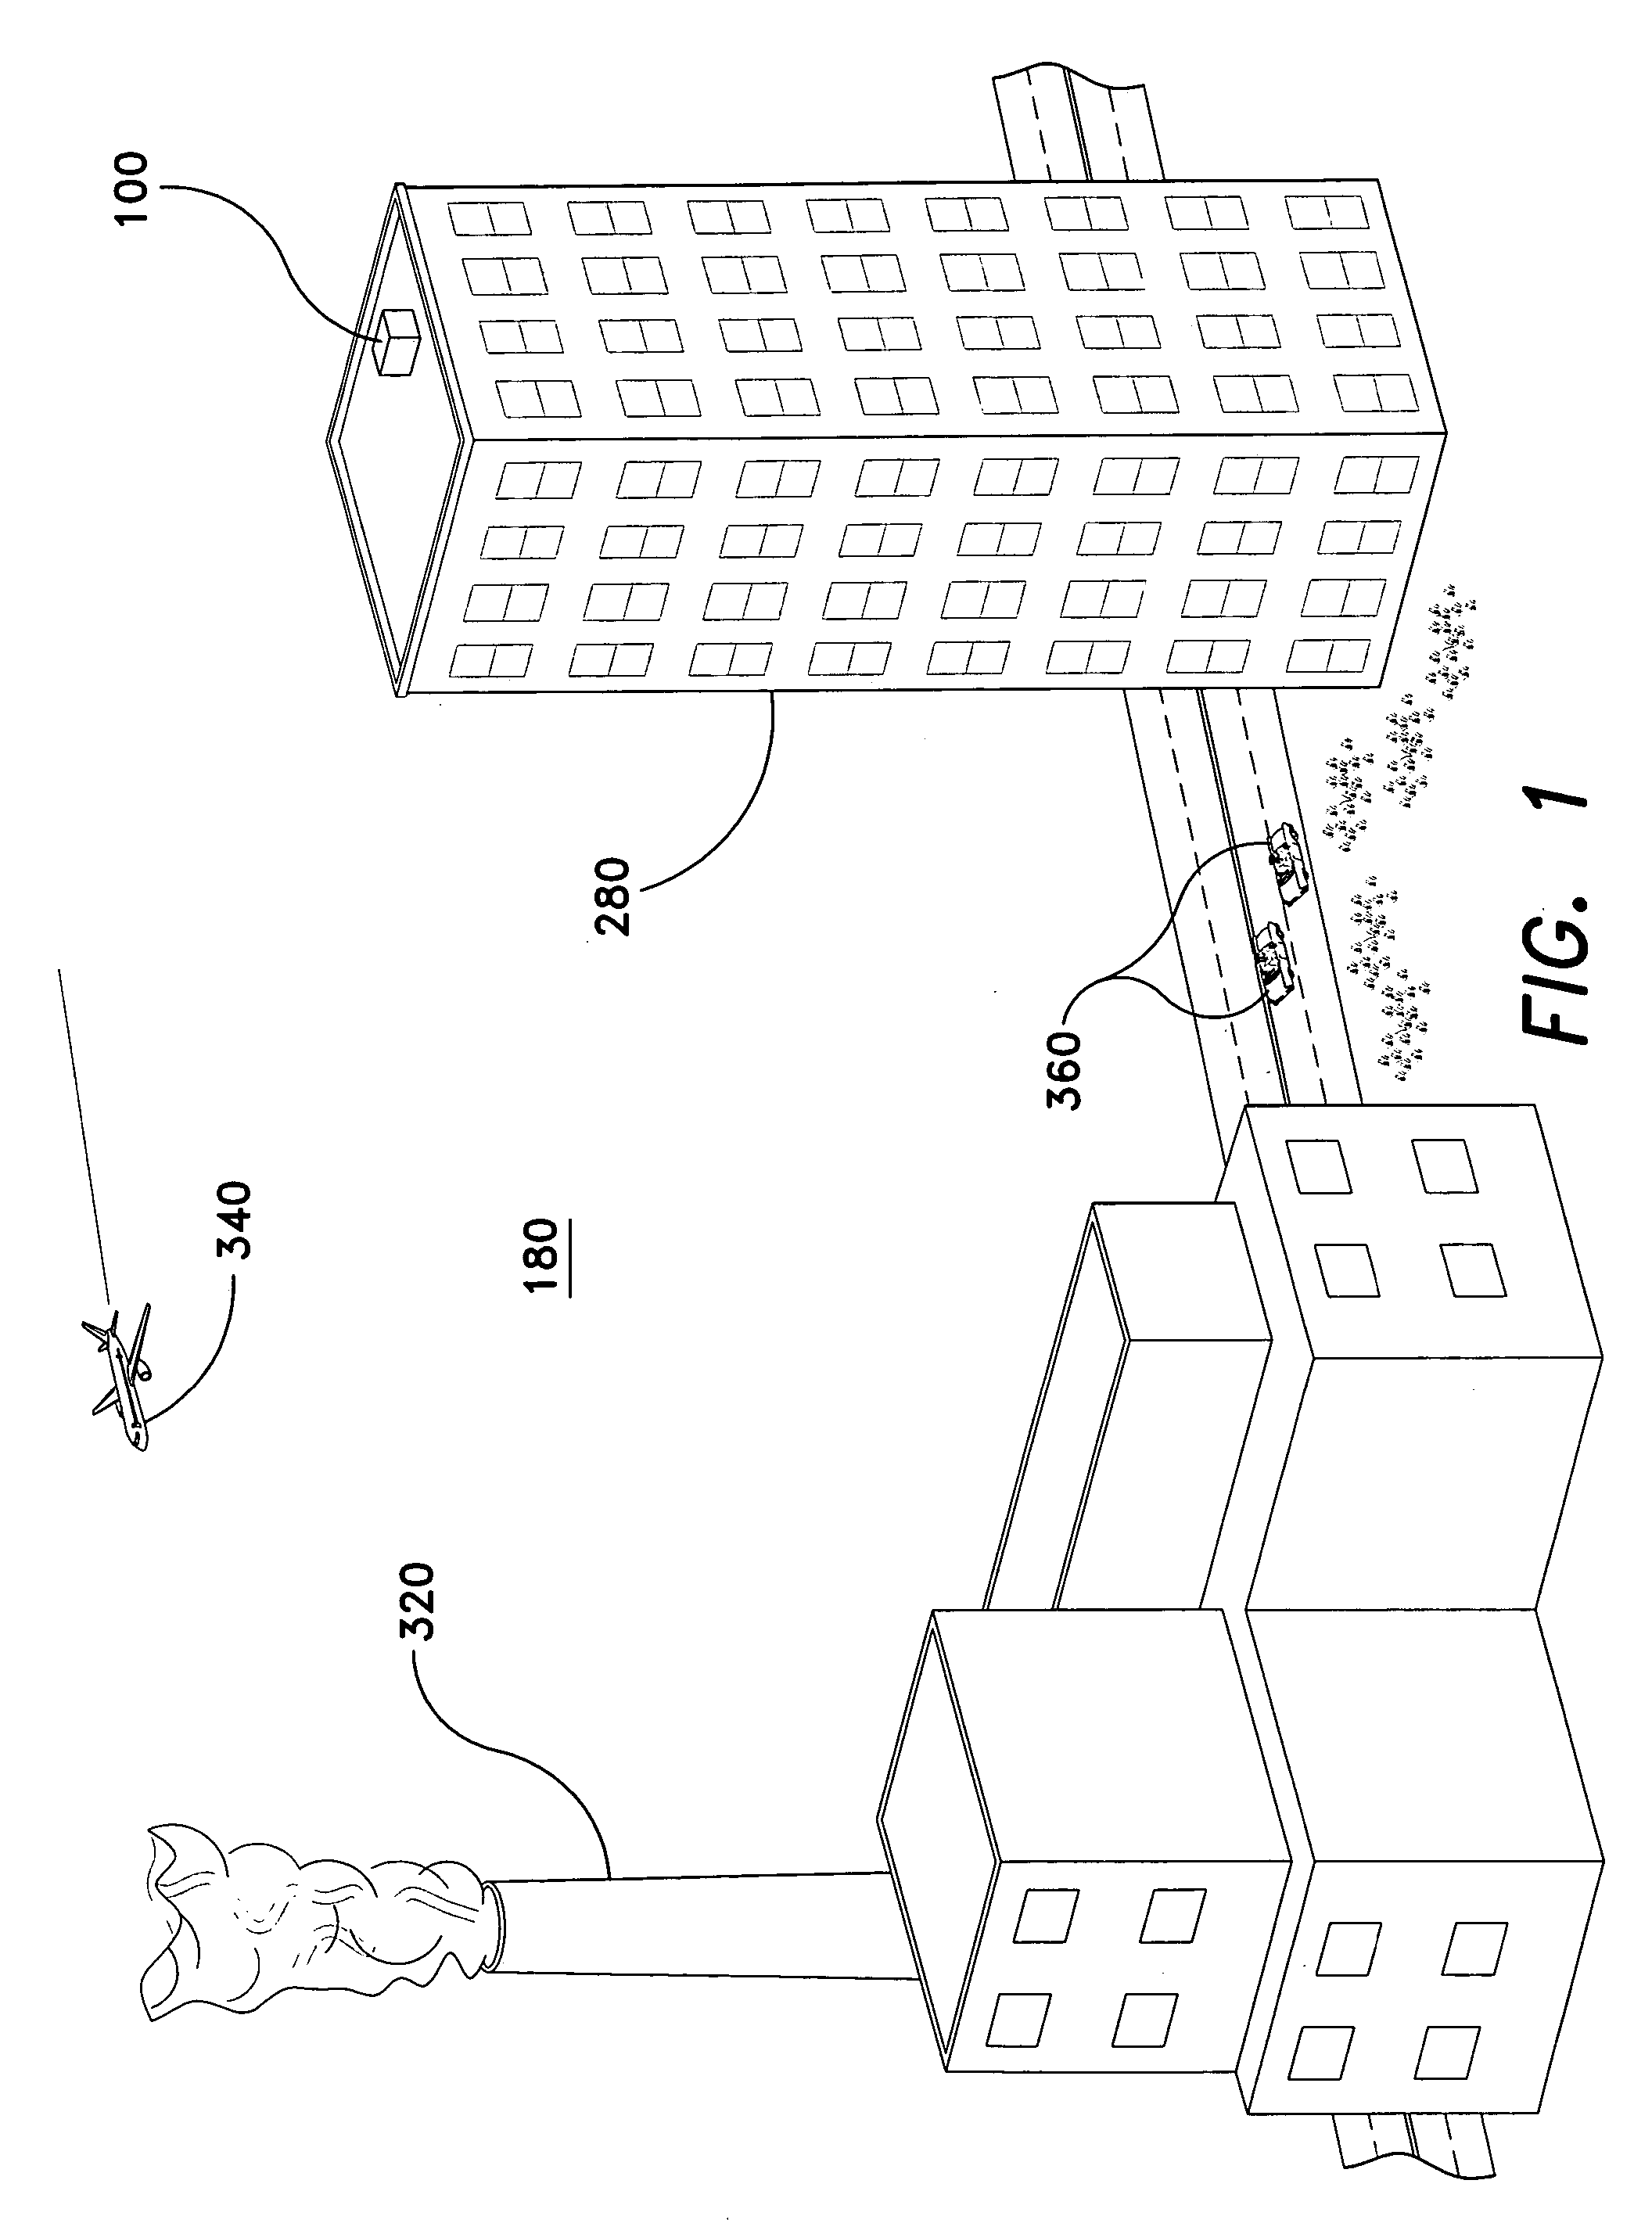 Air purification system and method